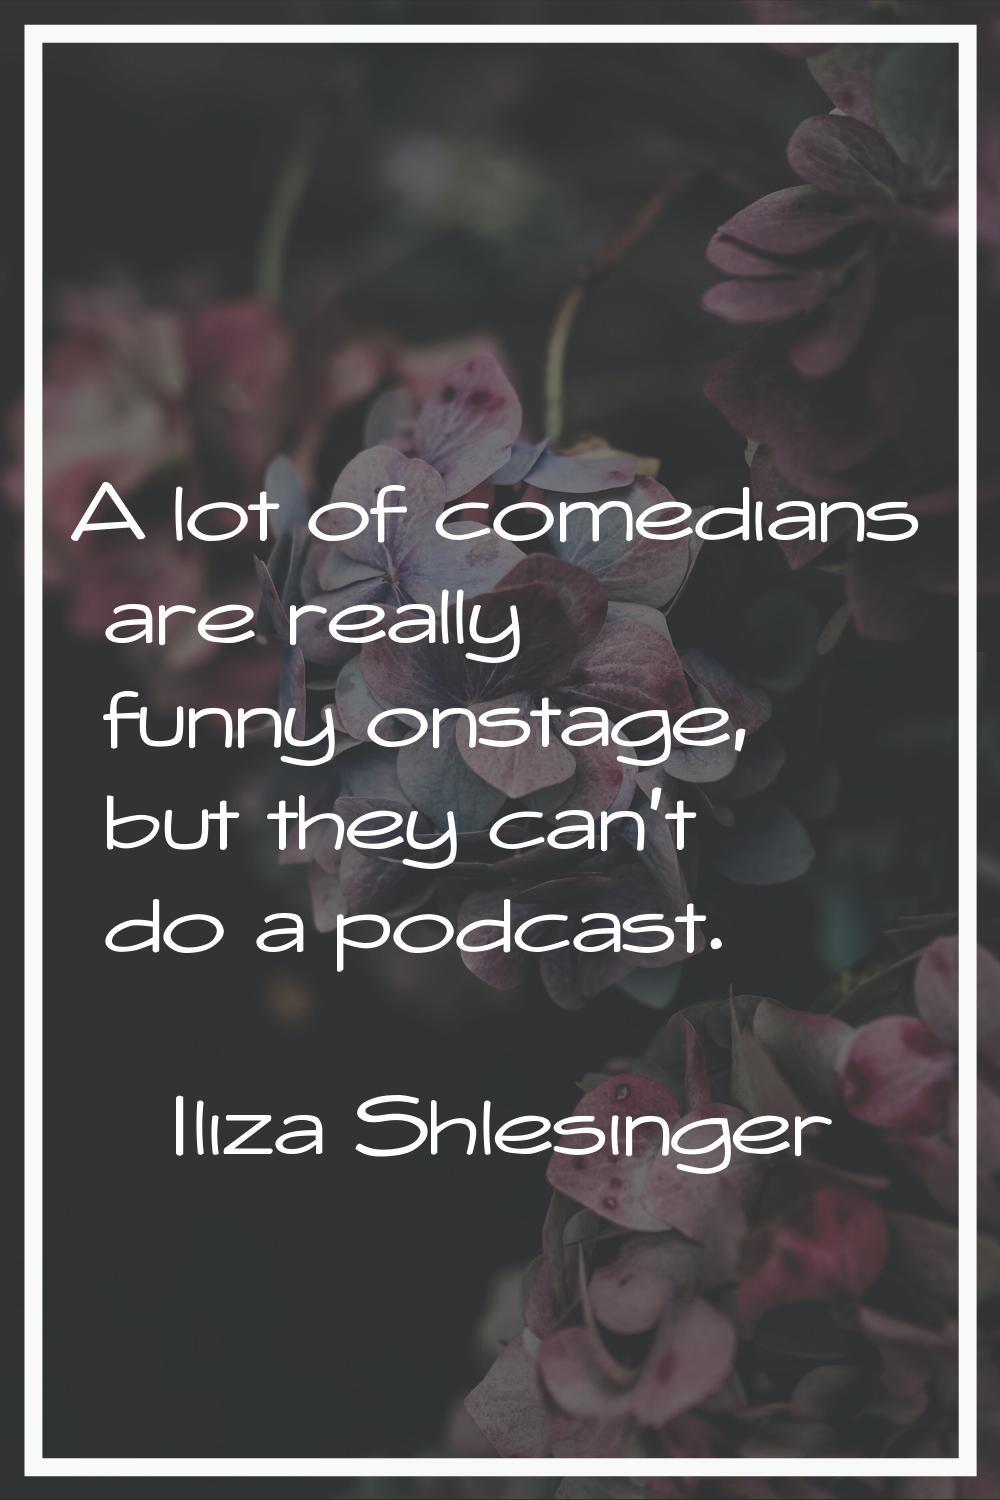 A lot of comedians are really funny onstage, but they can't do a podcast.